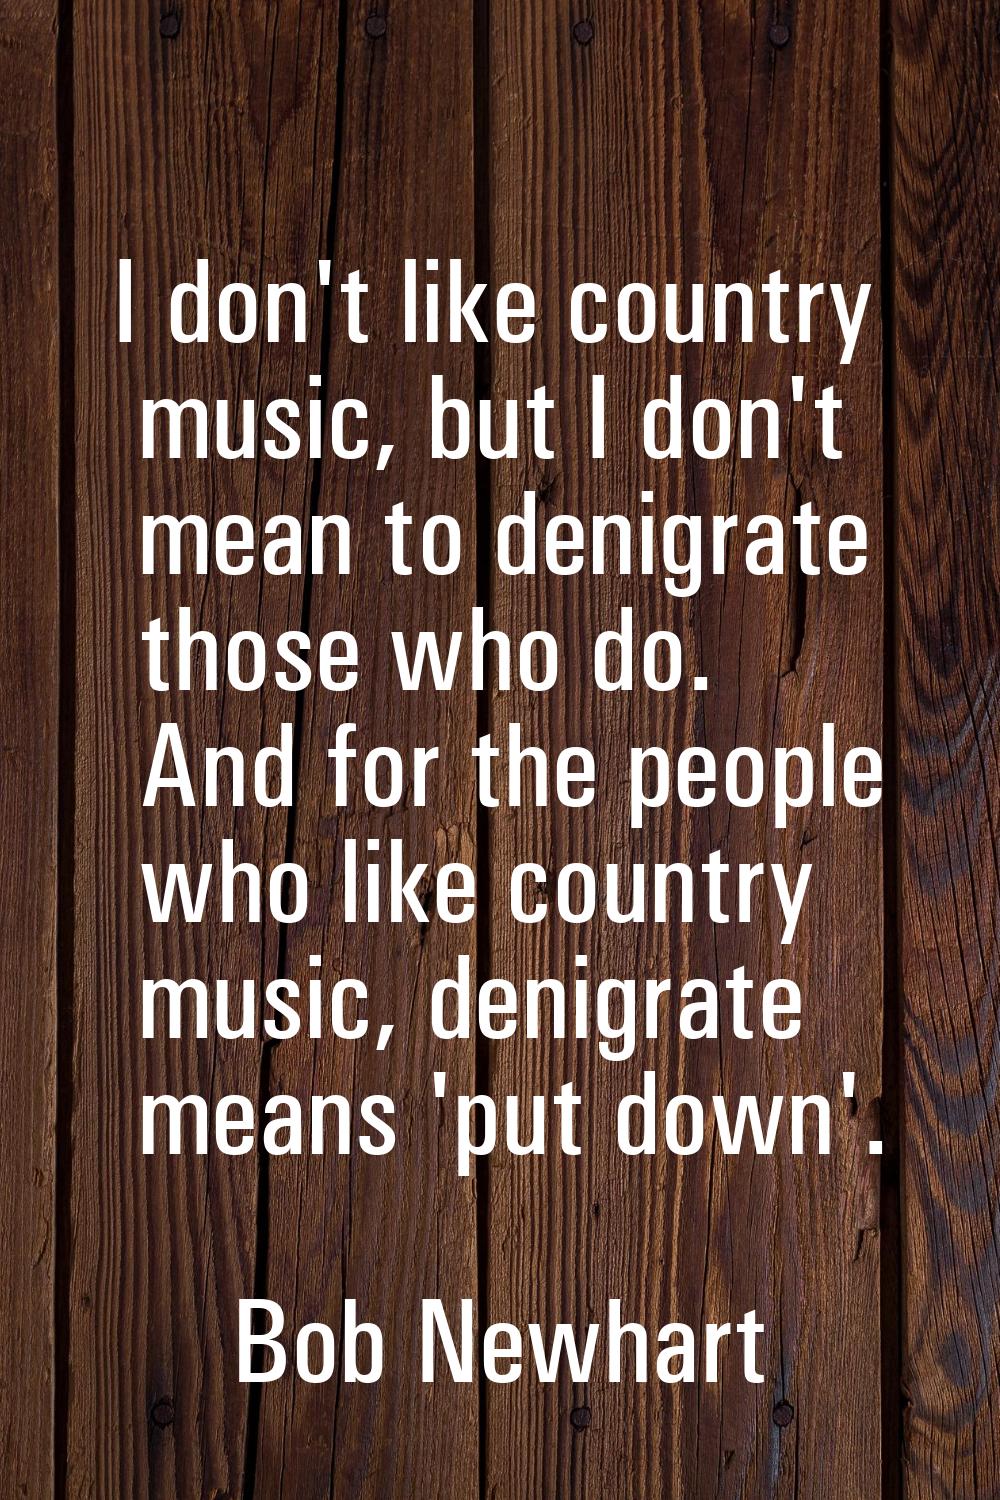 I don't like country music, but I don't mean to denigrate those who do. And for the people who like